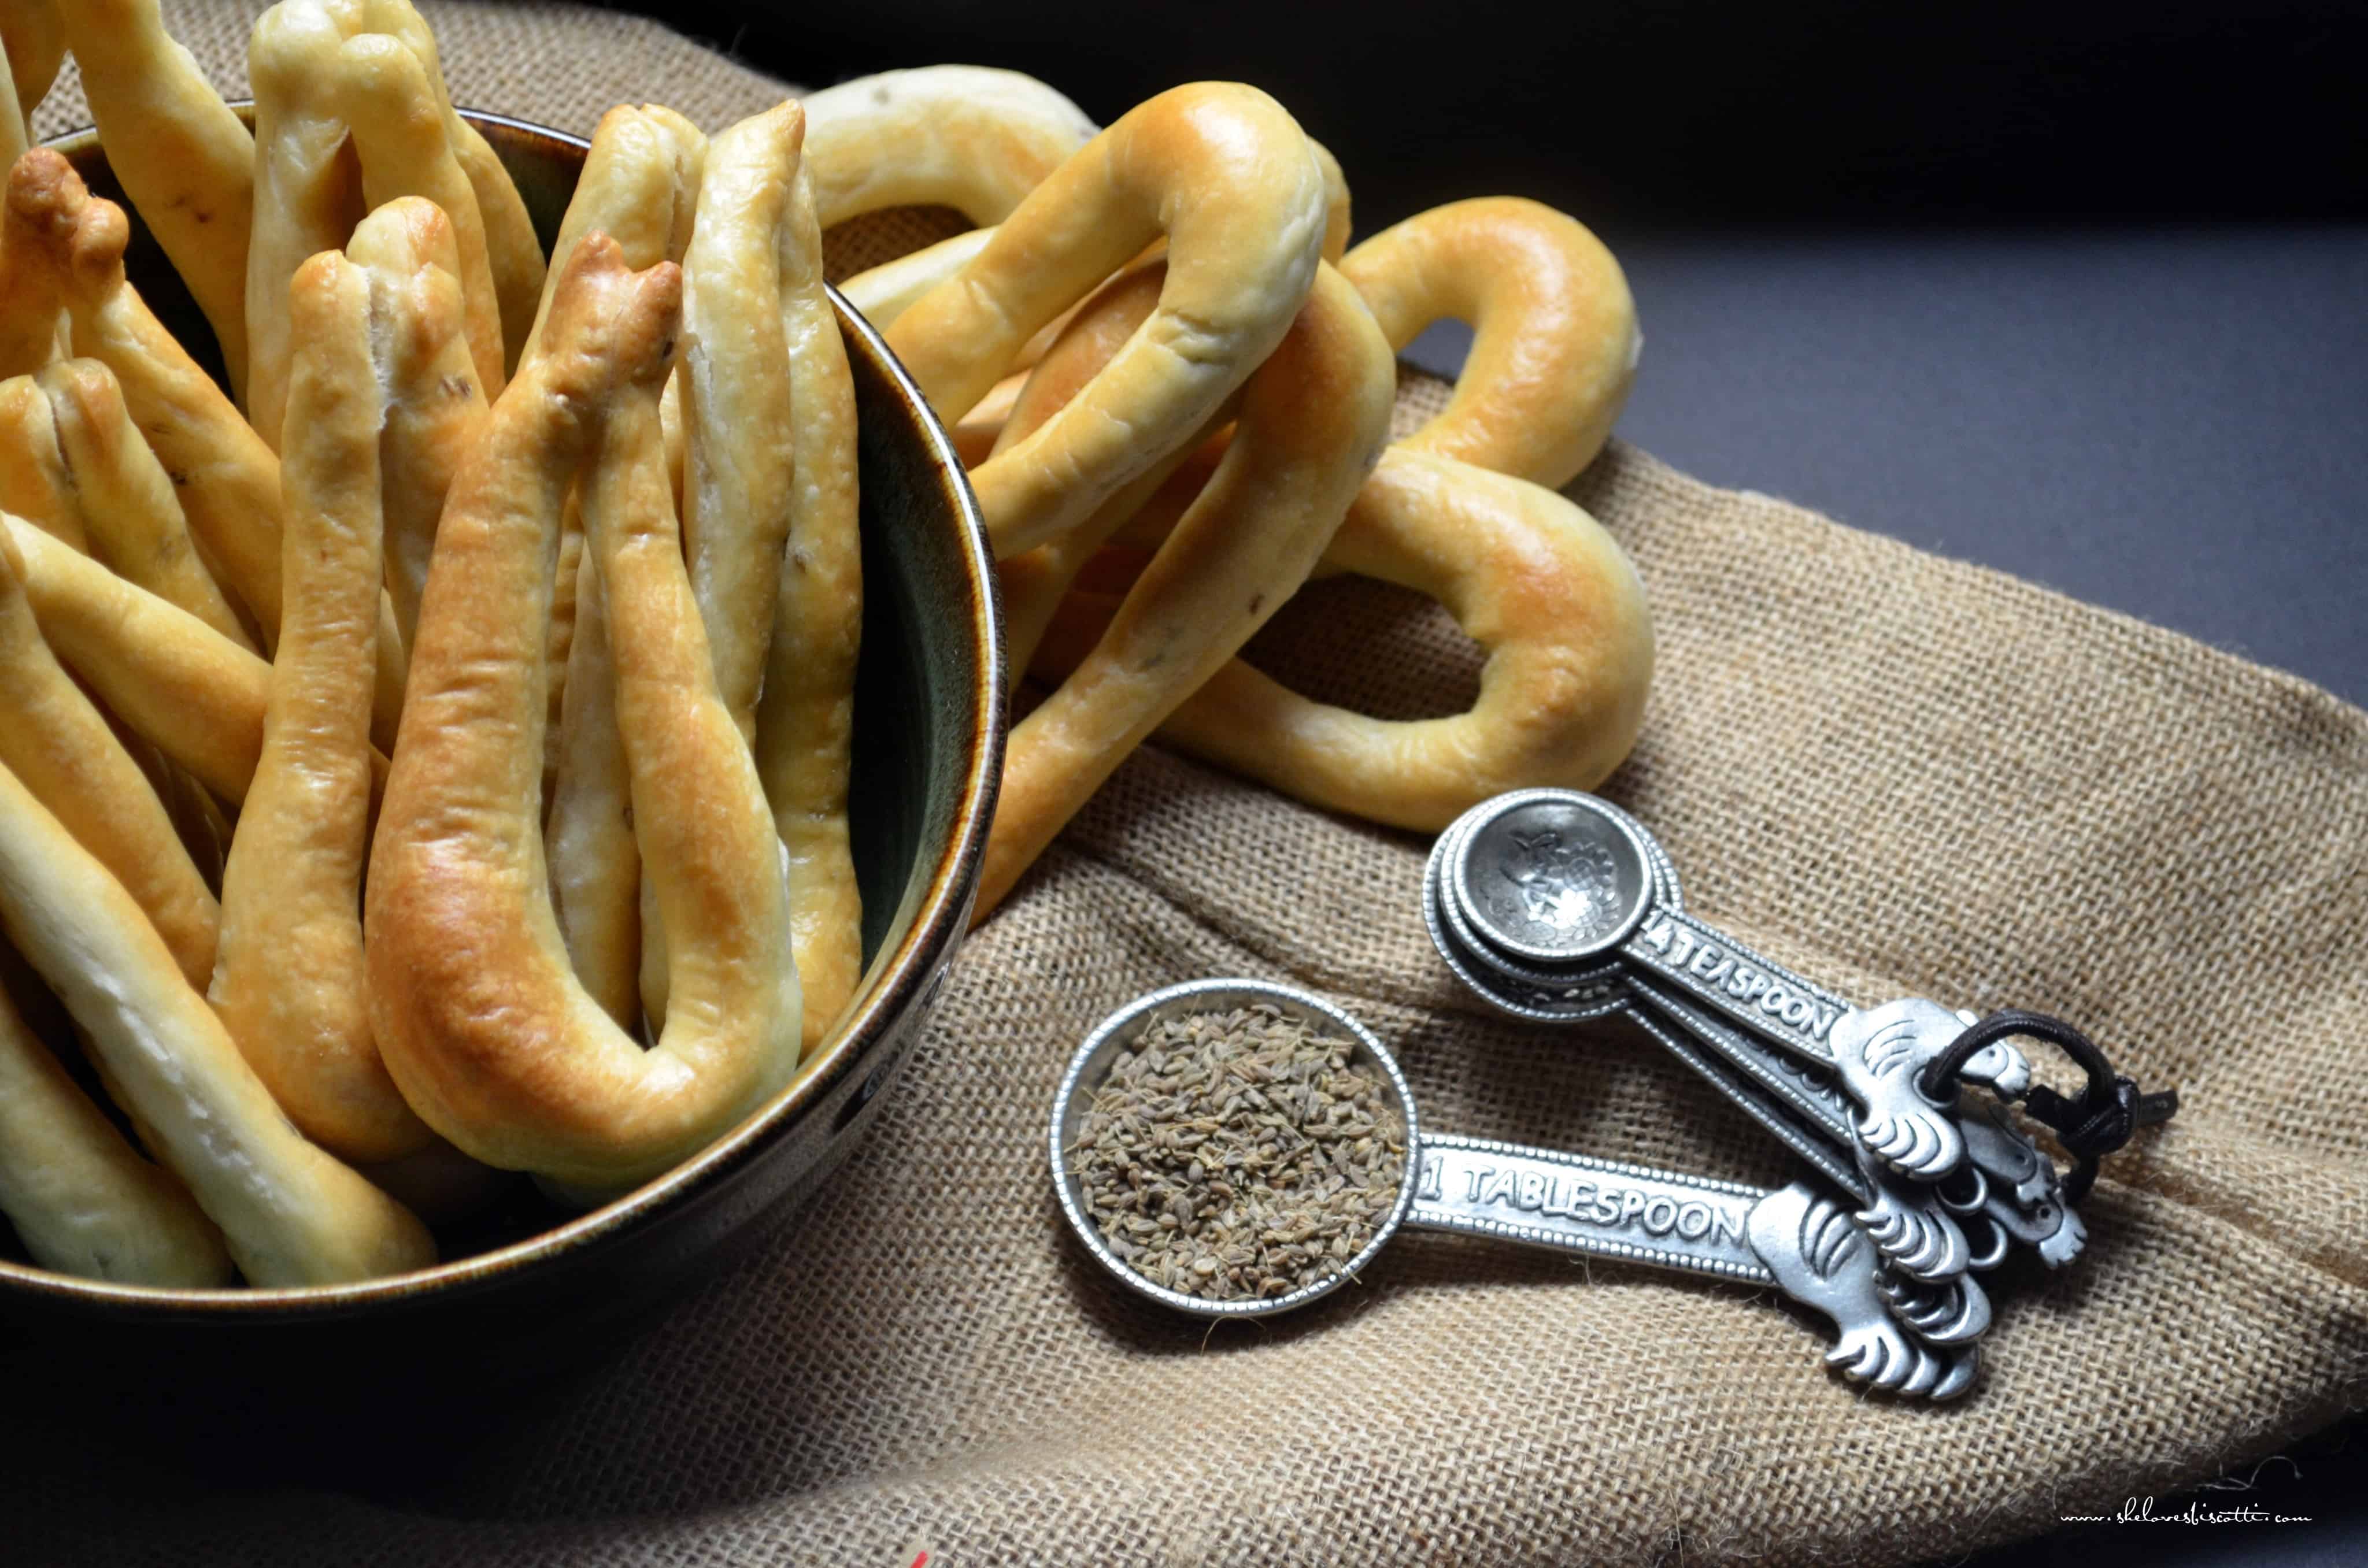 A bowl of taralli next to measuring spoons filled with anise seeds.